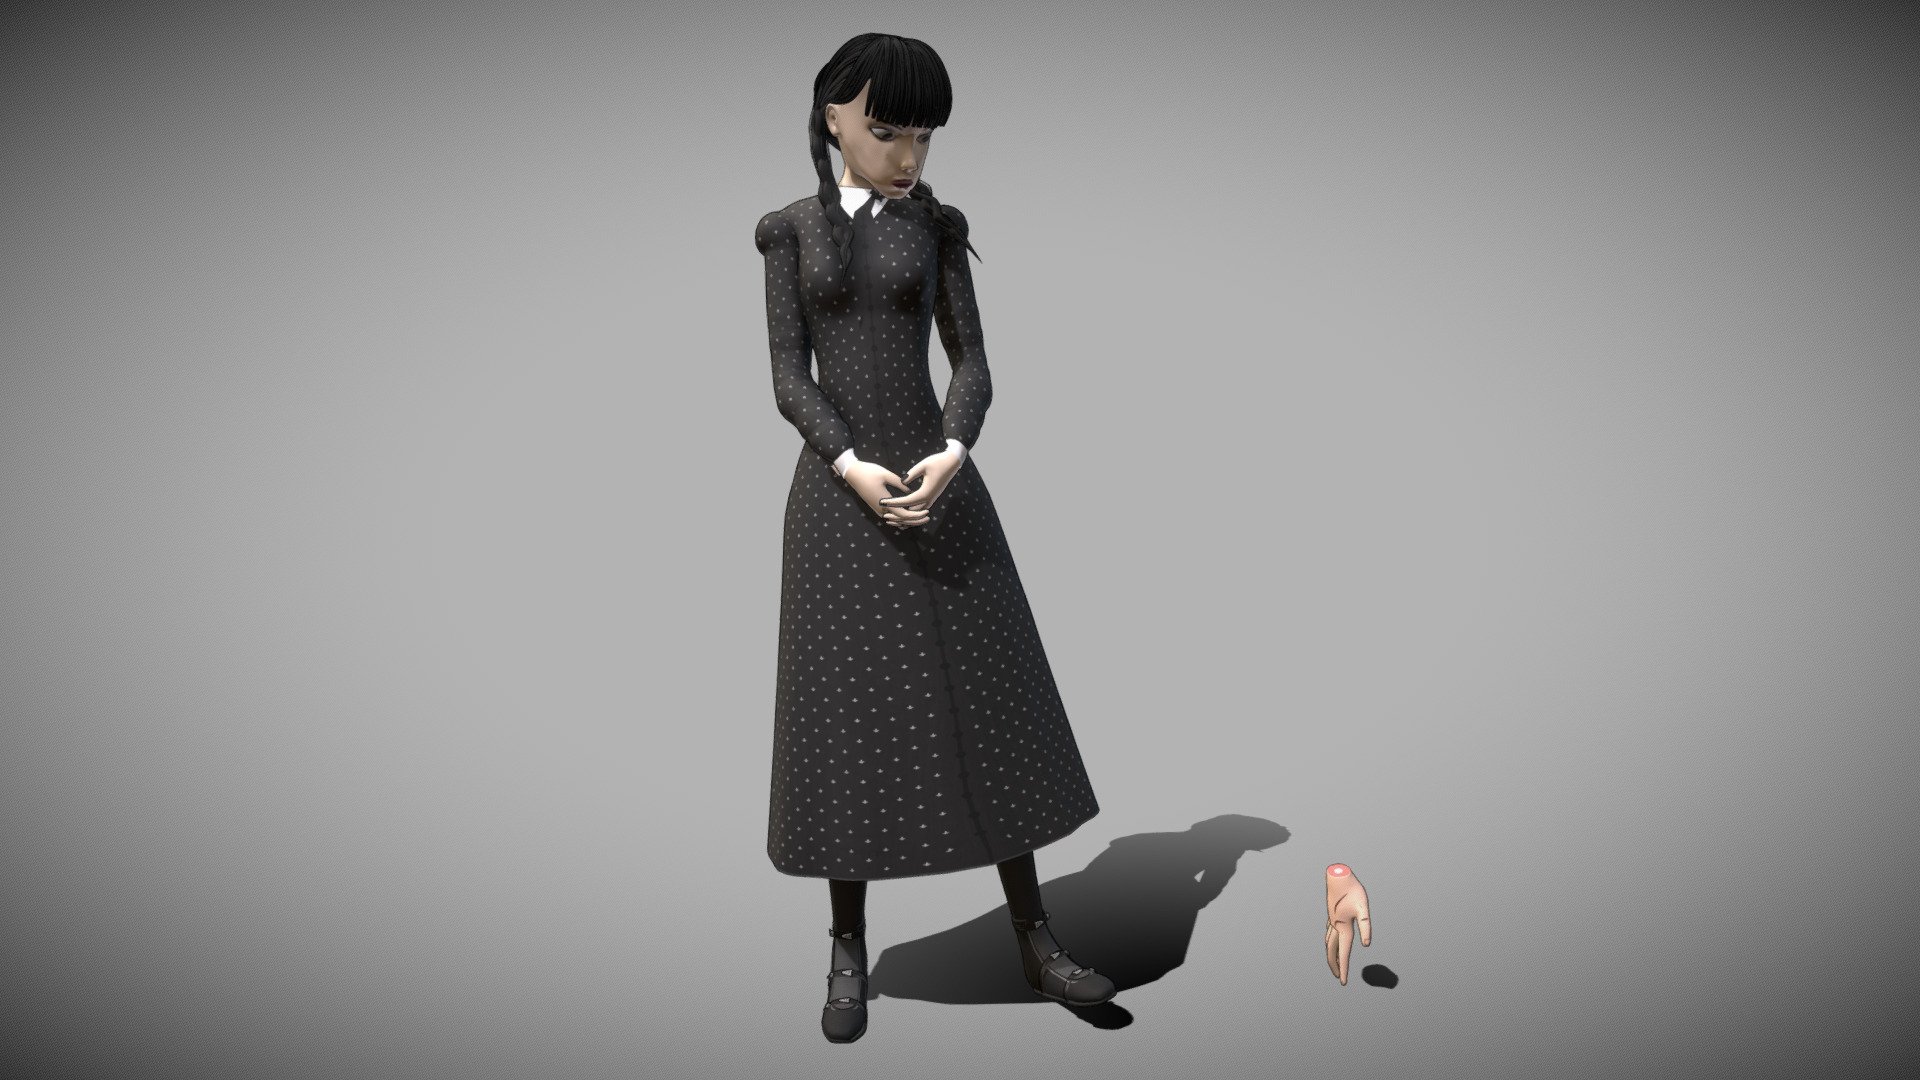 Wednesday Friday Addams is the only daughter of the Addams Family
Toon shader, Rigged.
UV Unwrapped and textured. 
Comes with textures at 4096x4096 resolution. 

The model contains 14 objects, 6 sets of material, and 3 sets of textures. 
Modeled in Blender, painted in Substance Painter. 

Blend file before modifiers has 36.505 Faces, 41.538 Vertices.

Video Preview: https://youtu.be/Awc6ocLEqQo
.
My Gallery: https://edjan3d.wixsite.com/my-site - Wednesday Addams - Buy Royalty Free 3D model by Ed.Jan 3d model